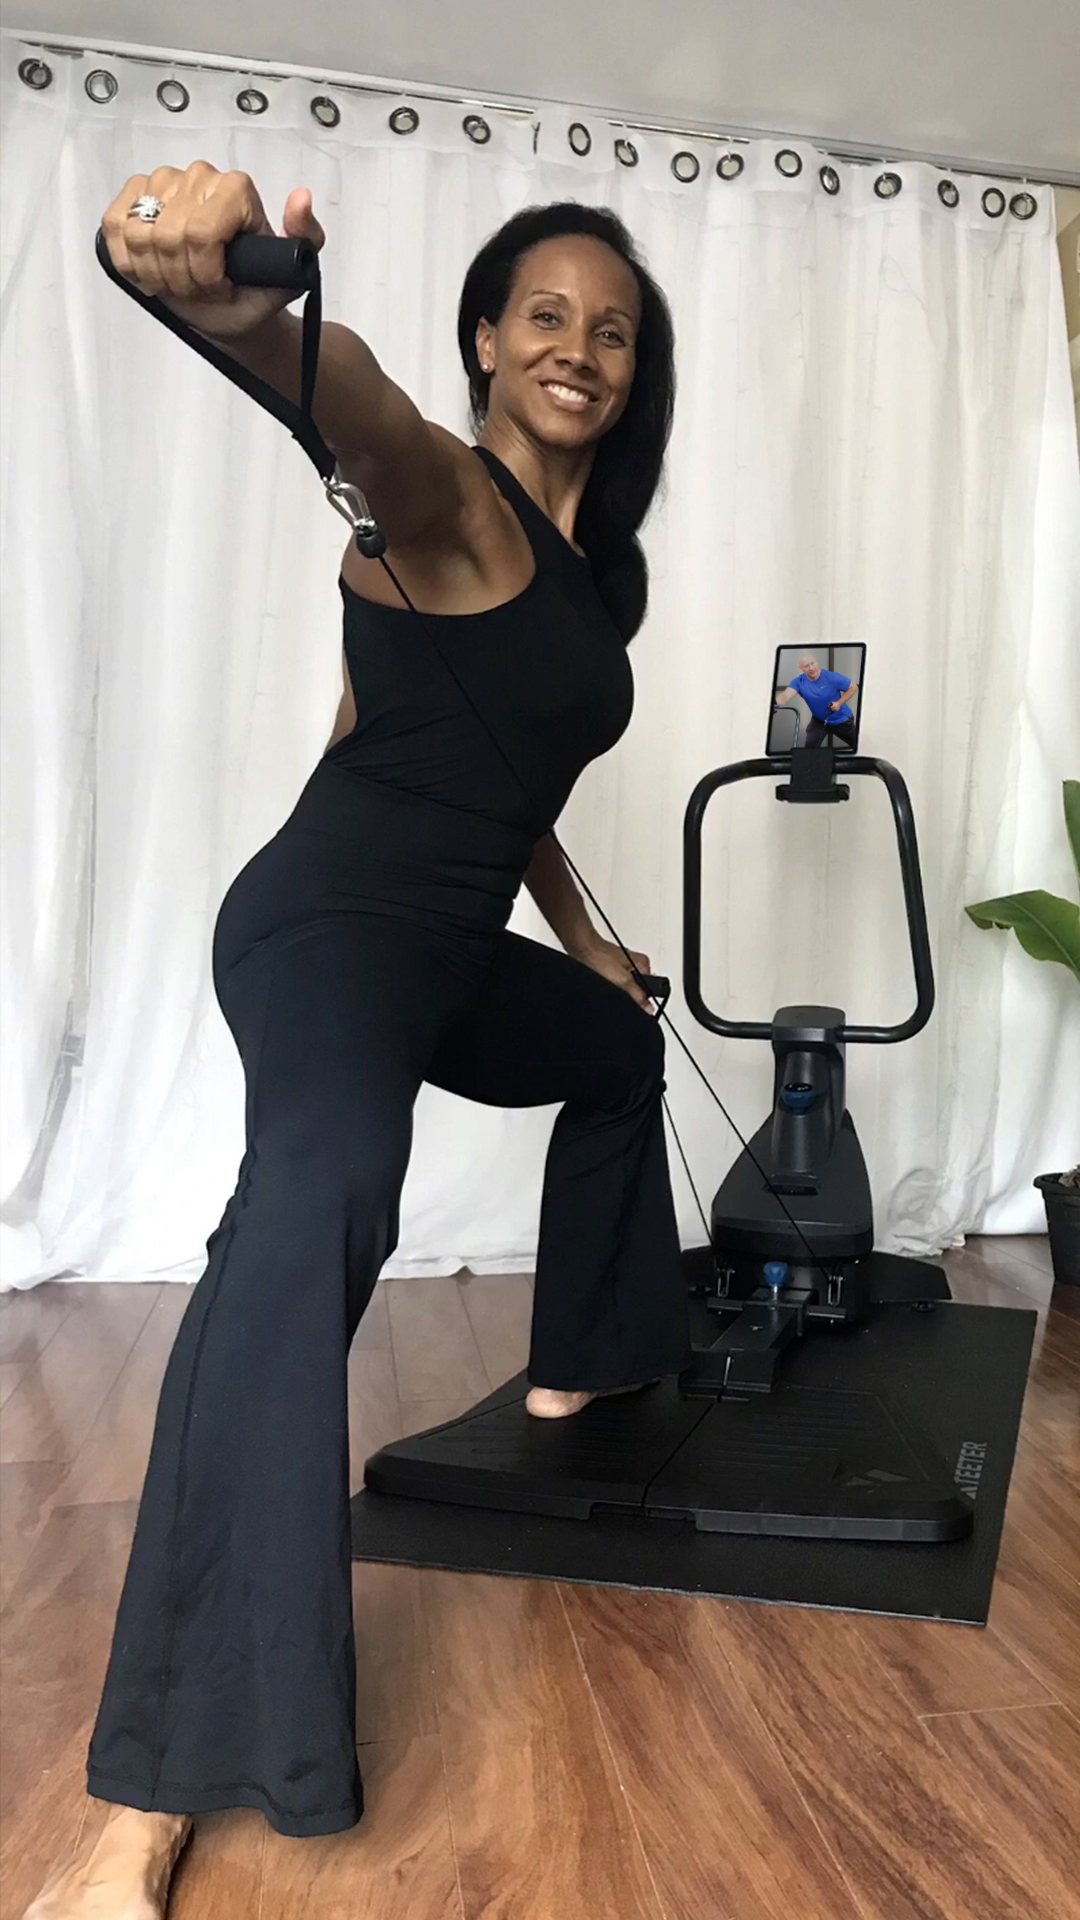 Teeter Move Community - Person On FitForm Exercising at home with Teeter Move App 